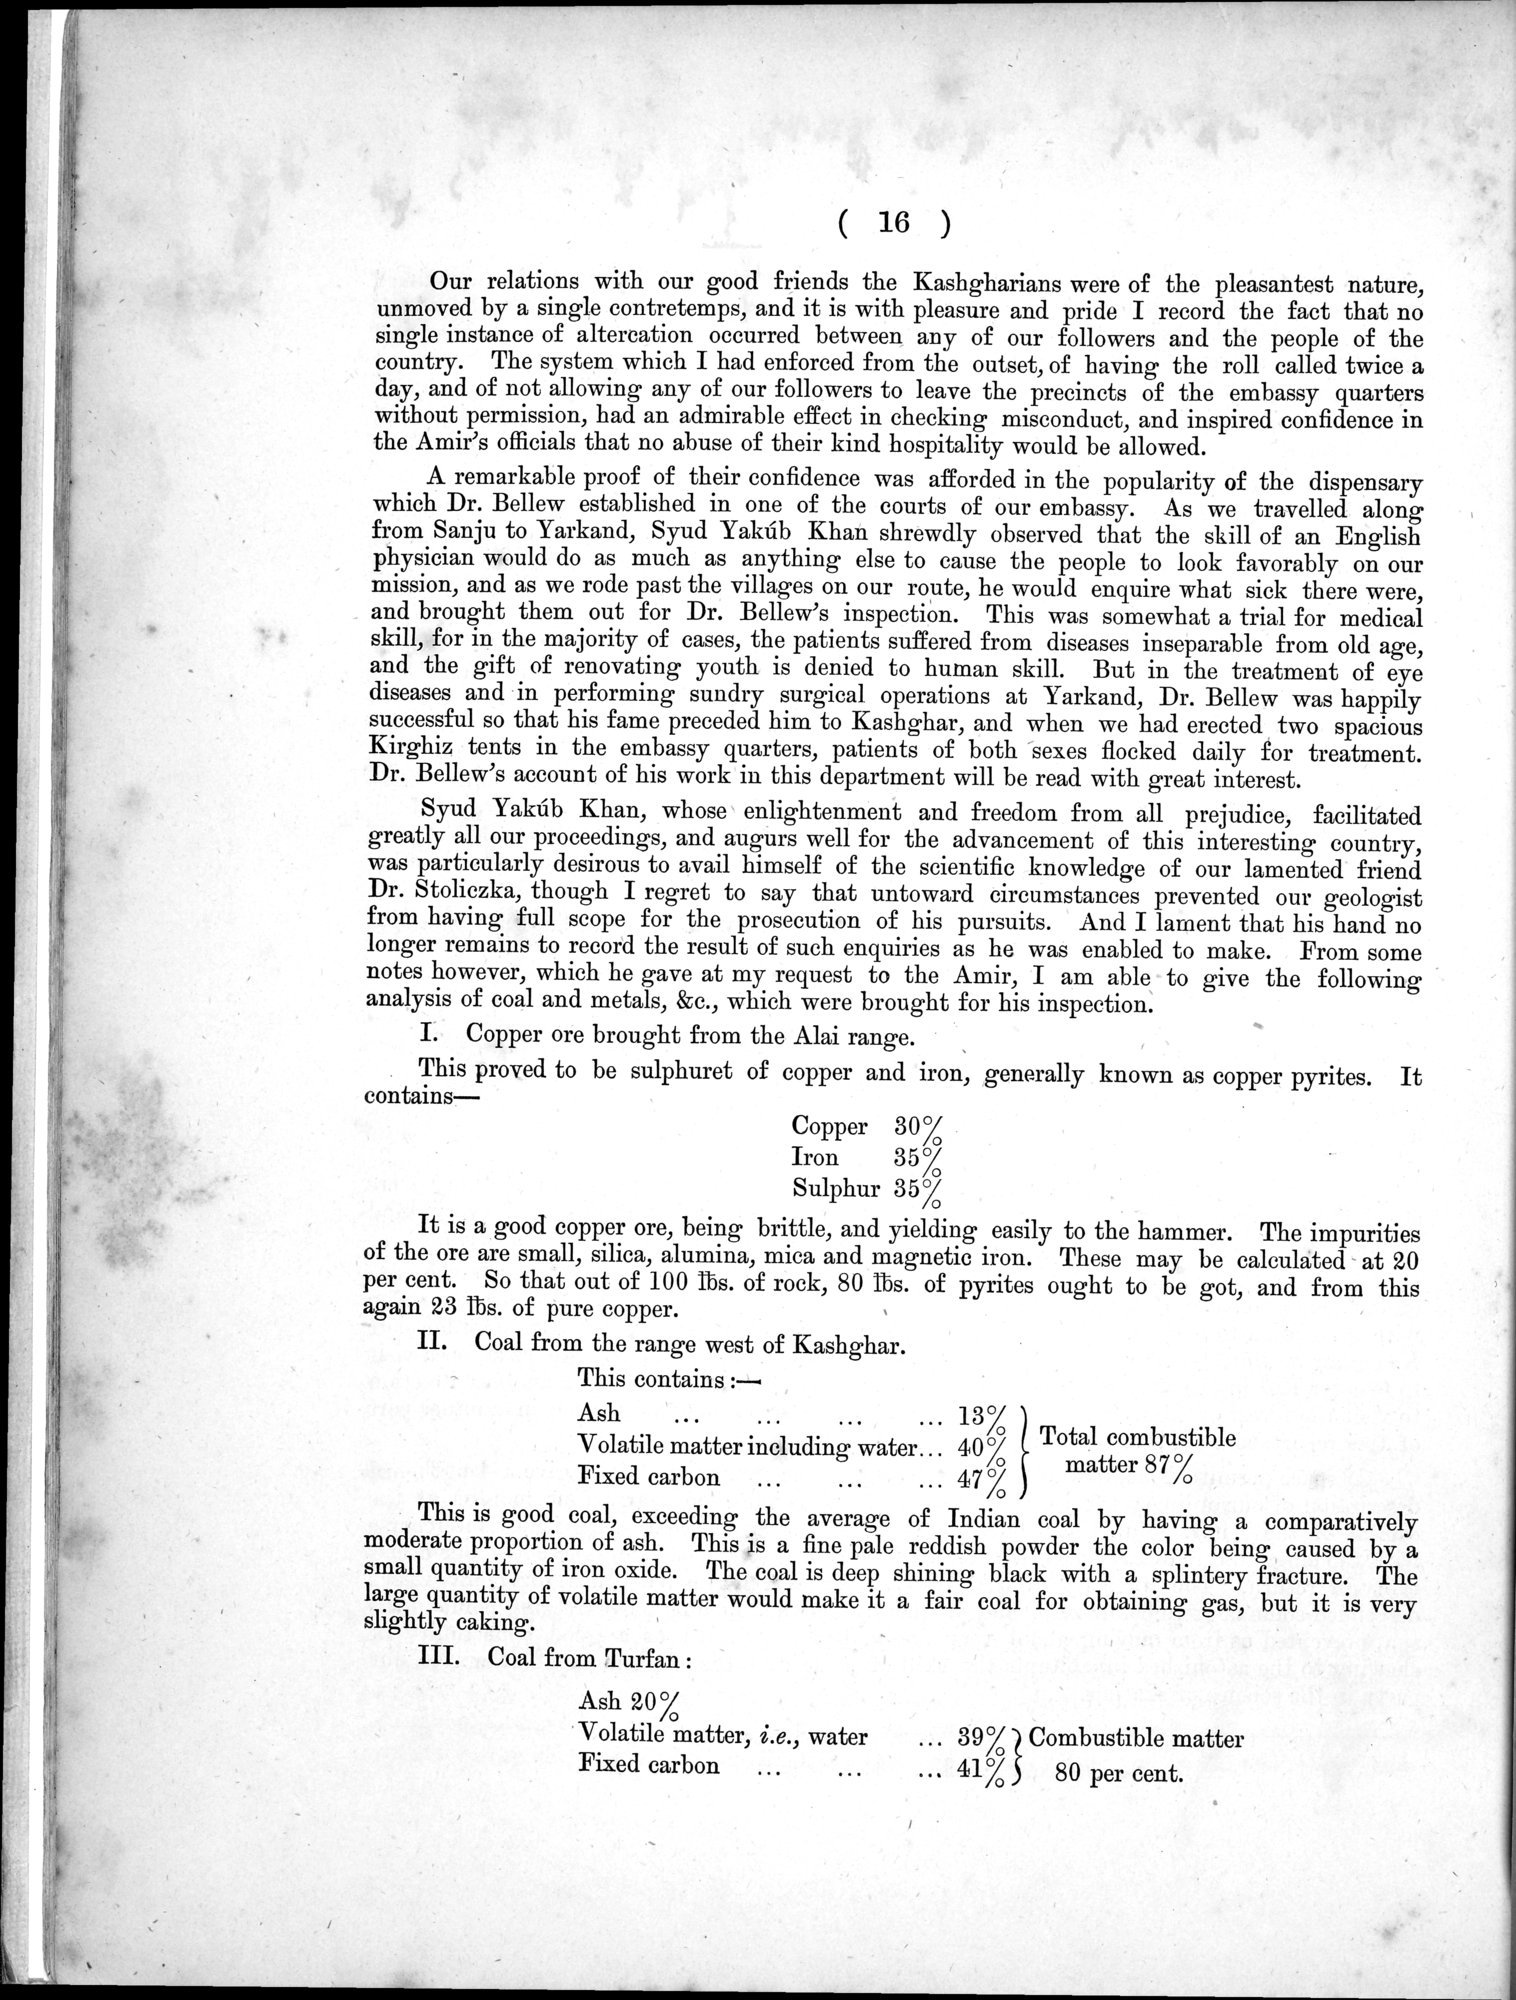 Report of a Mission to Yarkund in 1873 : vol.1 / Page 40 (Grayscale High Resolution Image)